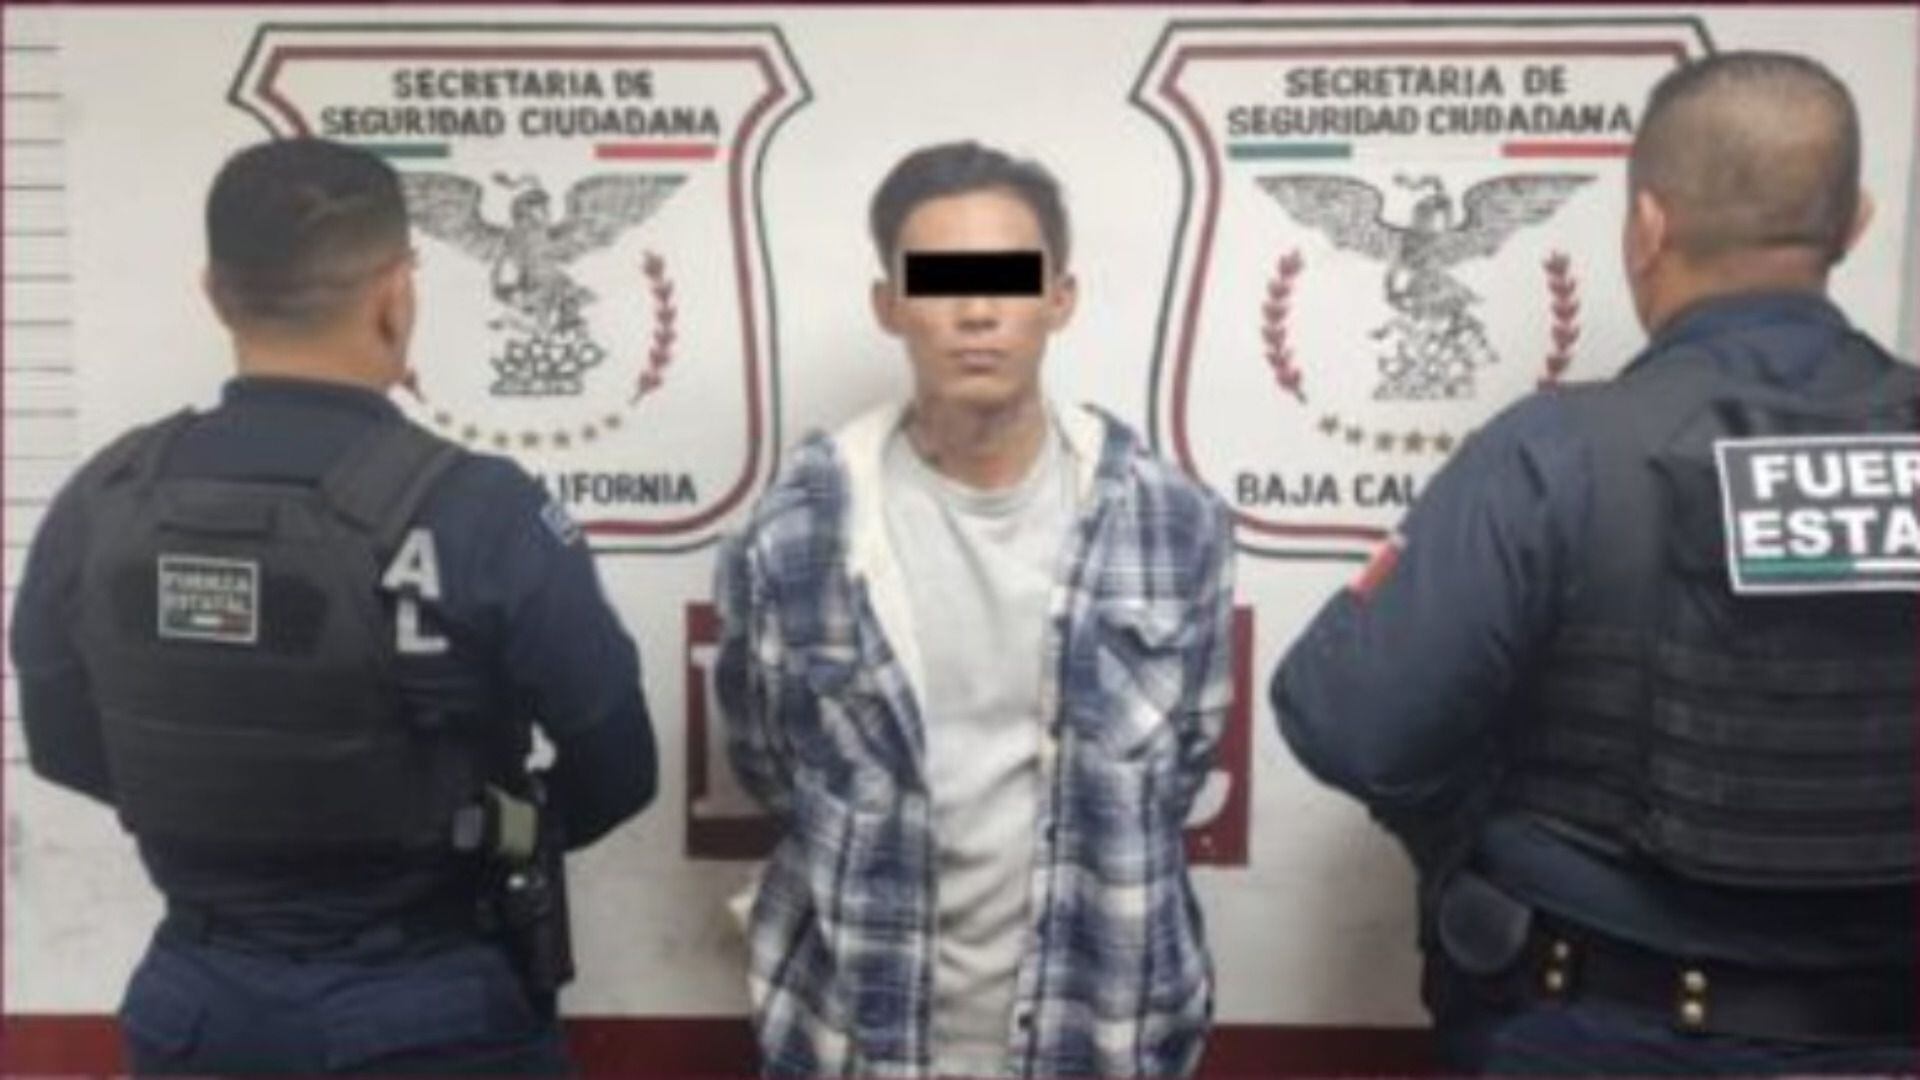 One of the subjects detained by the authorities (Photo: SSCBC)